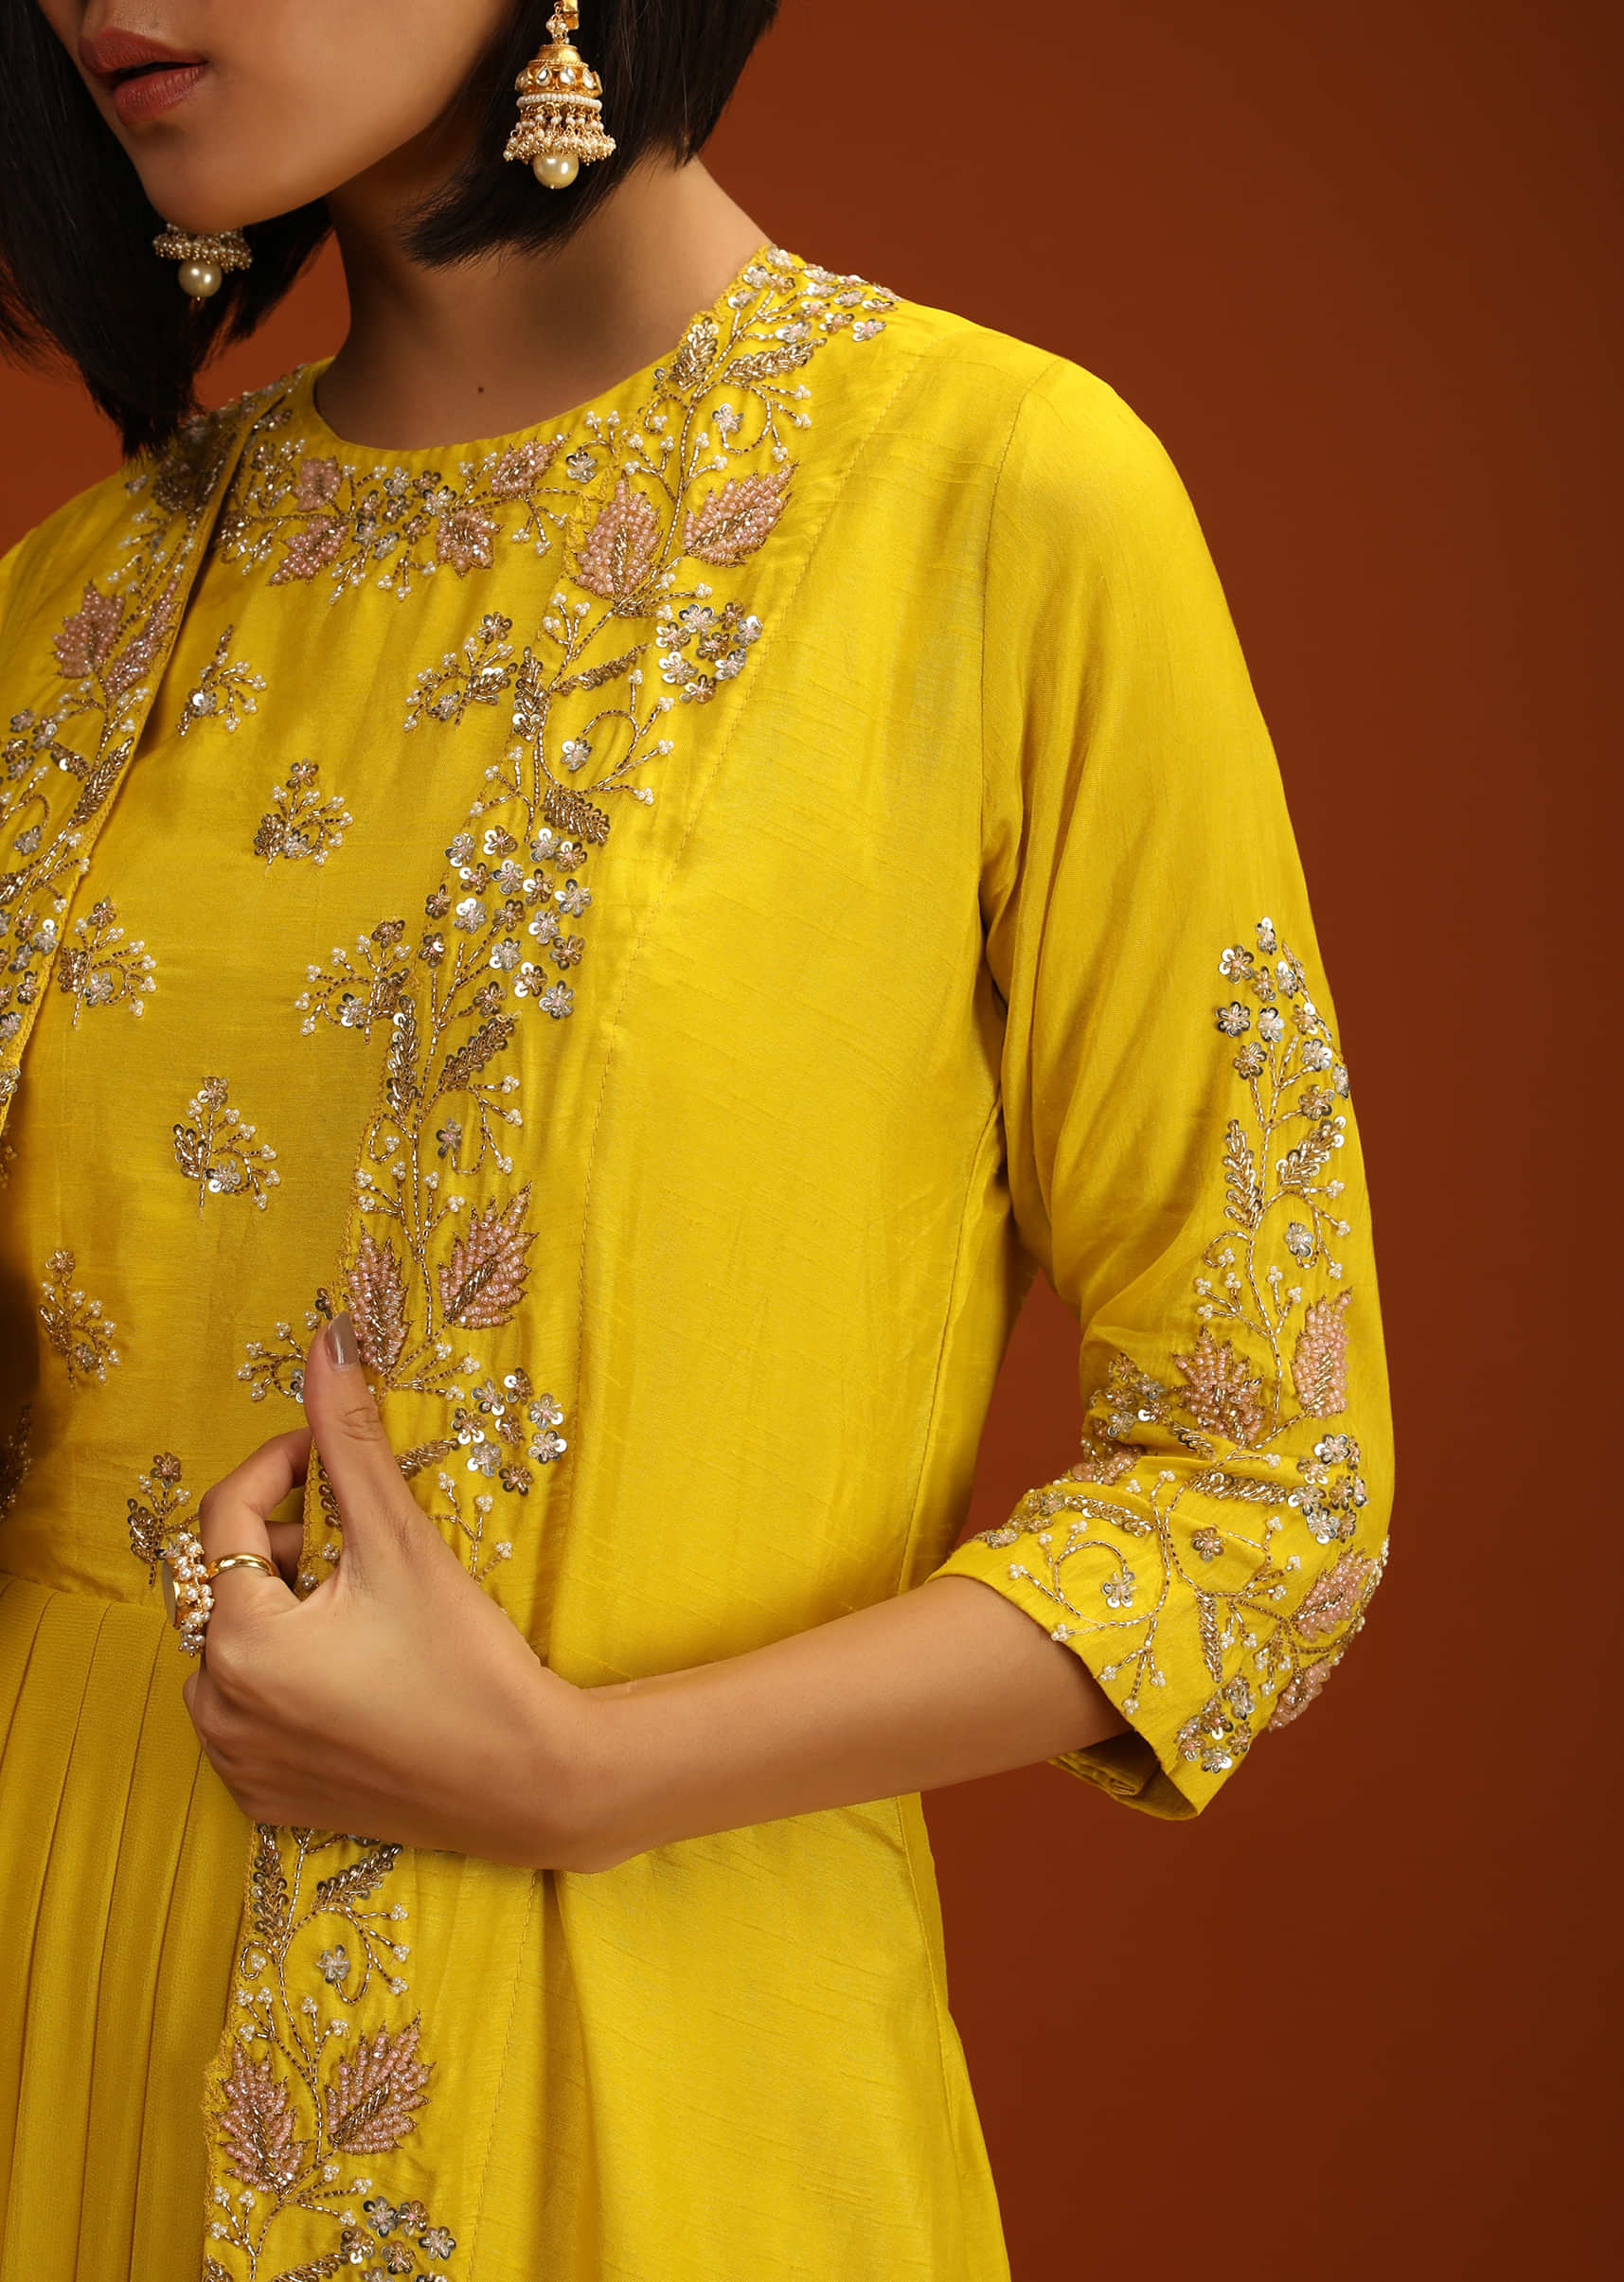 Lemon Yellow Indowestern Dress And Full Sleeves Jacket Set With Hand Embroidered Floral Motifs